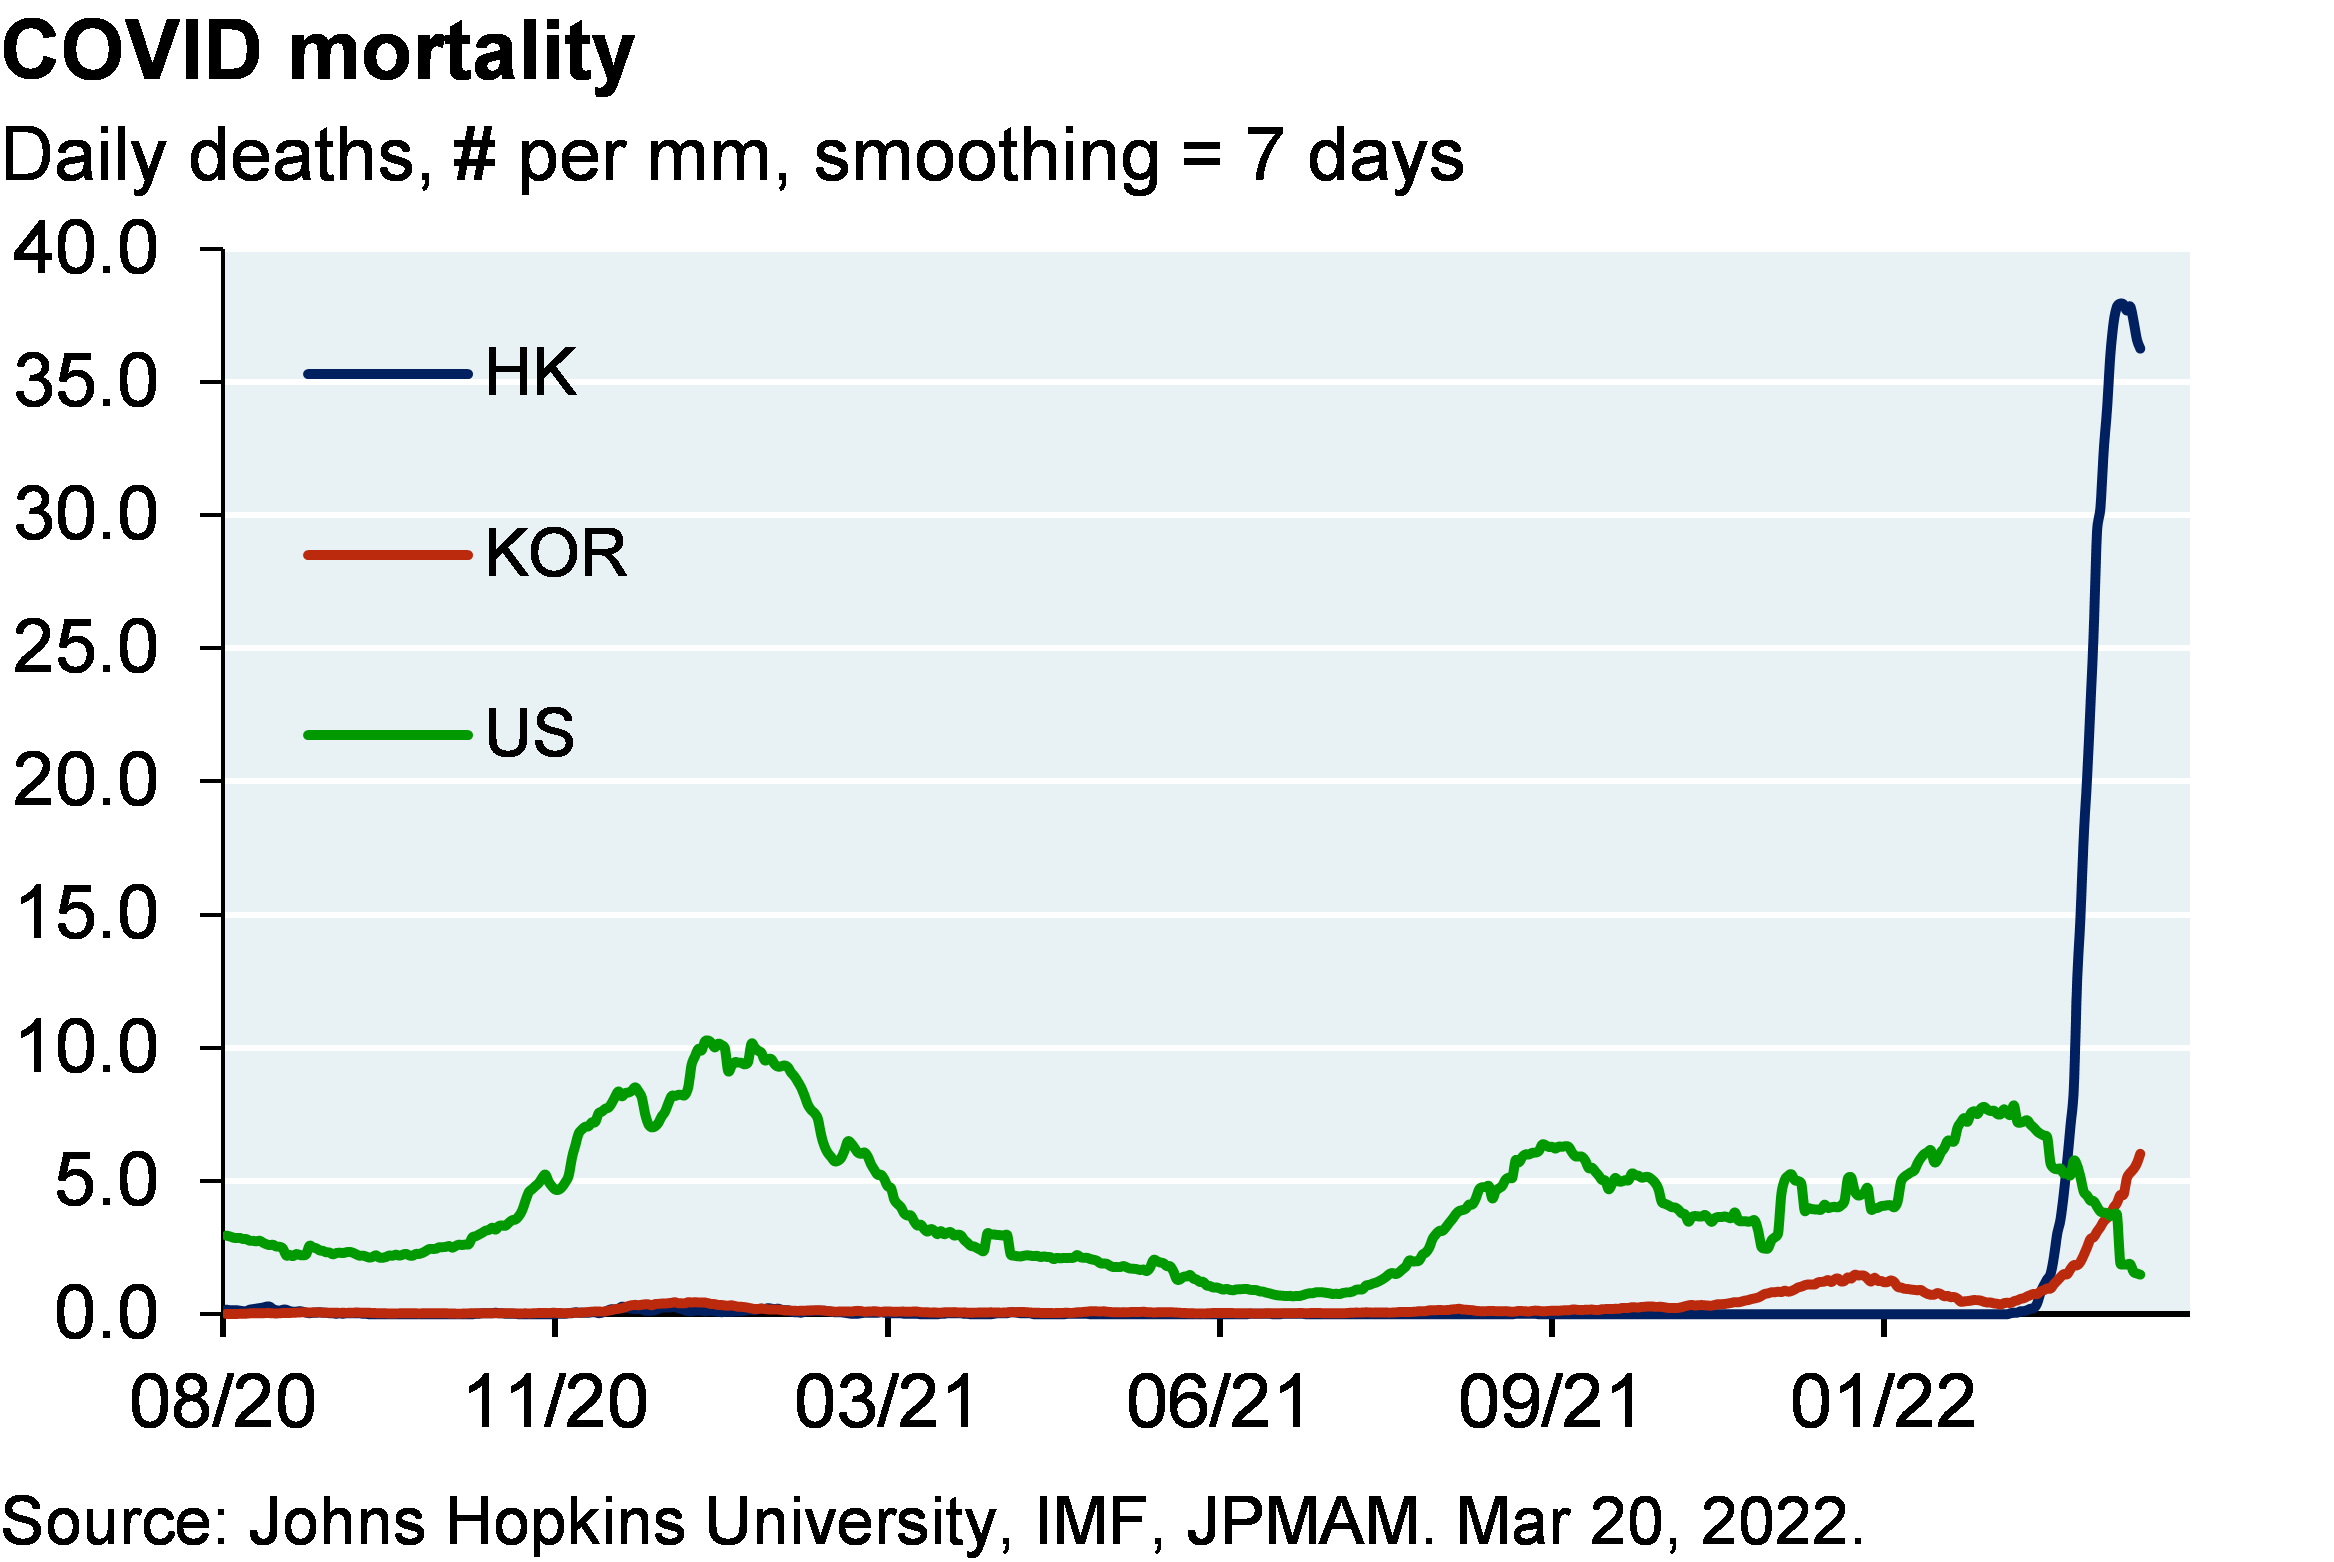 Line chart shows COVID mortality in Honk Kong, Korea and the US from August 2020 to now. Current Hong Kong COVID mortality rates are ~4x peak US levels, which took place last year, and are well above mortality levels in Korea